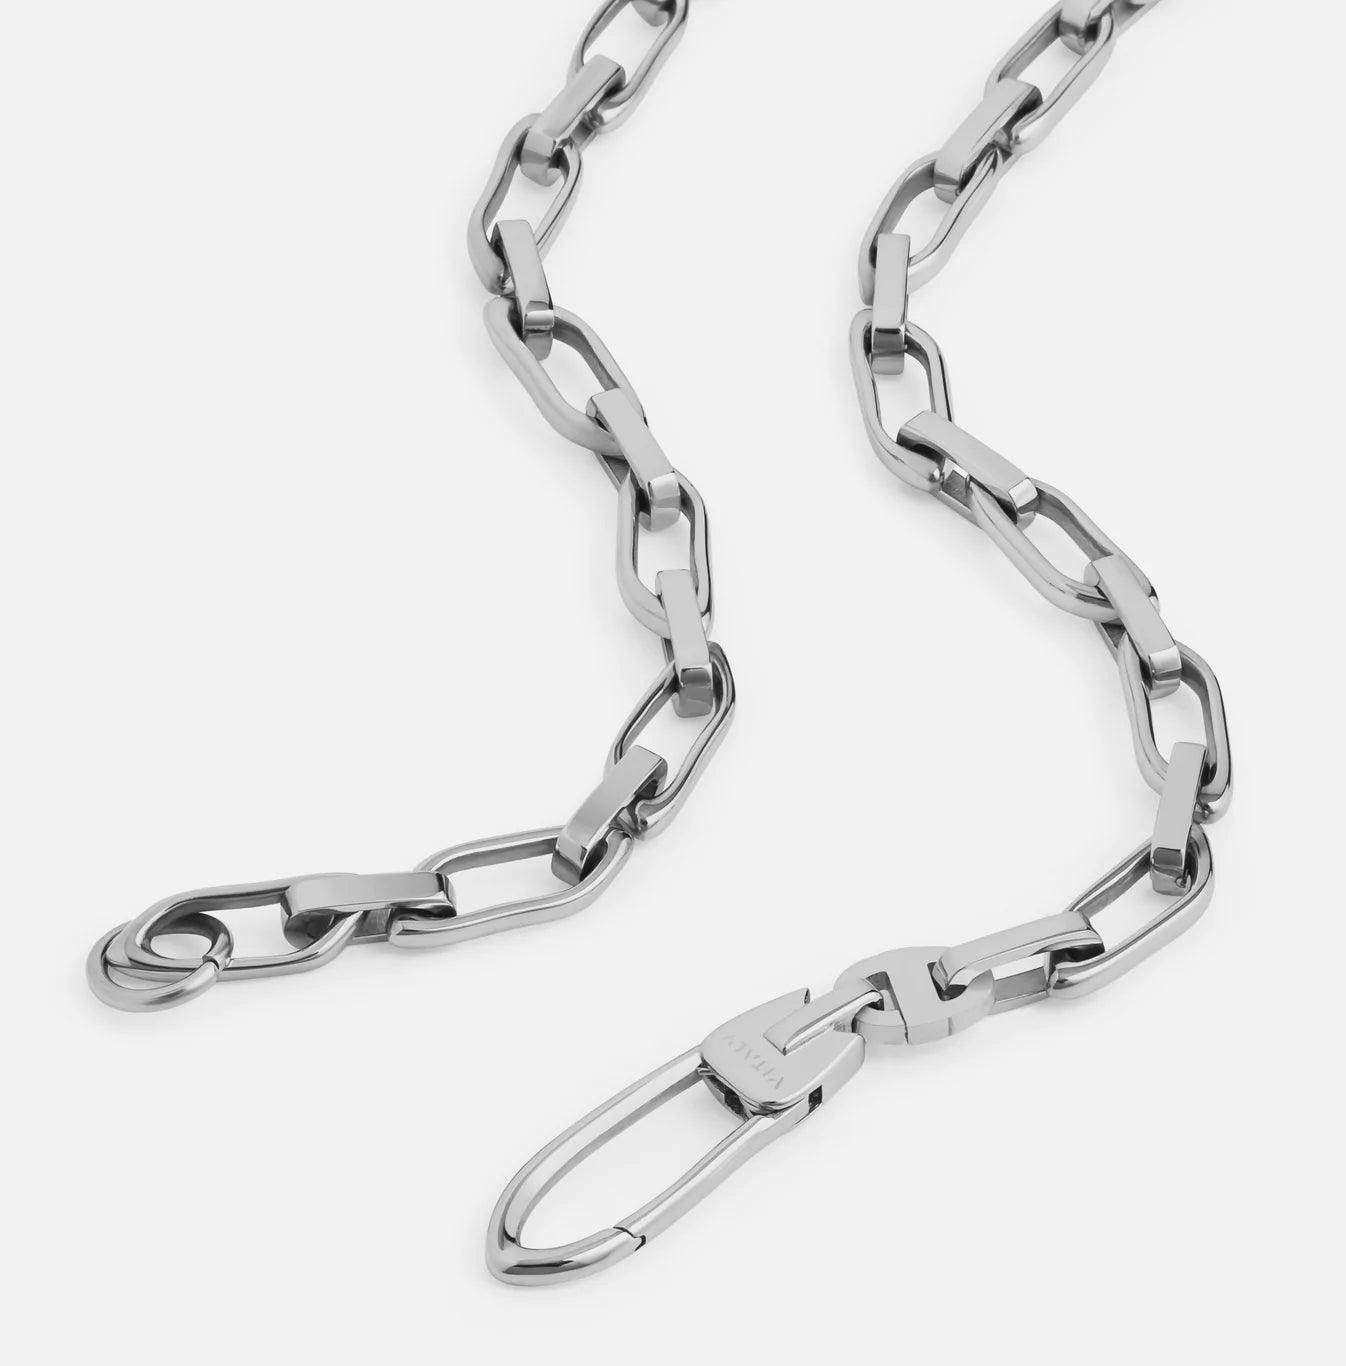 VITALY Slide Stainless Steel Necklace - SUPERCONSCIOUS BERLIN